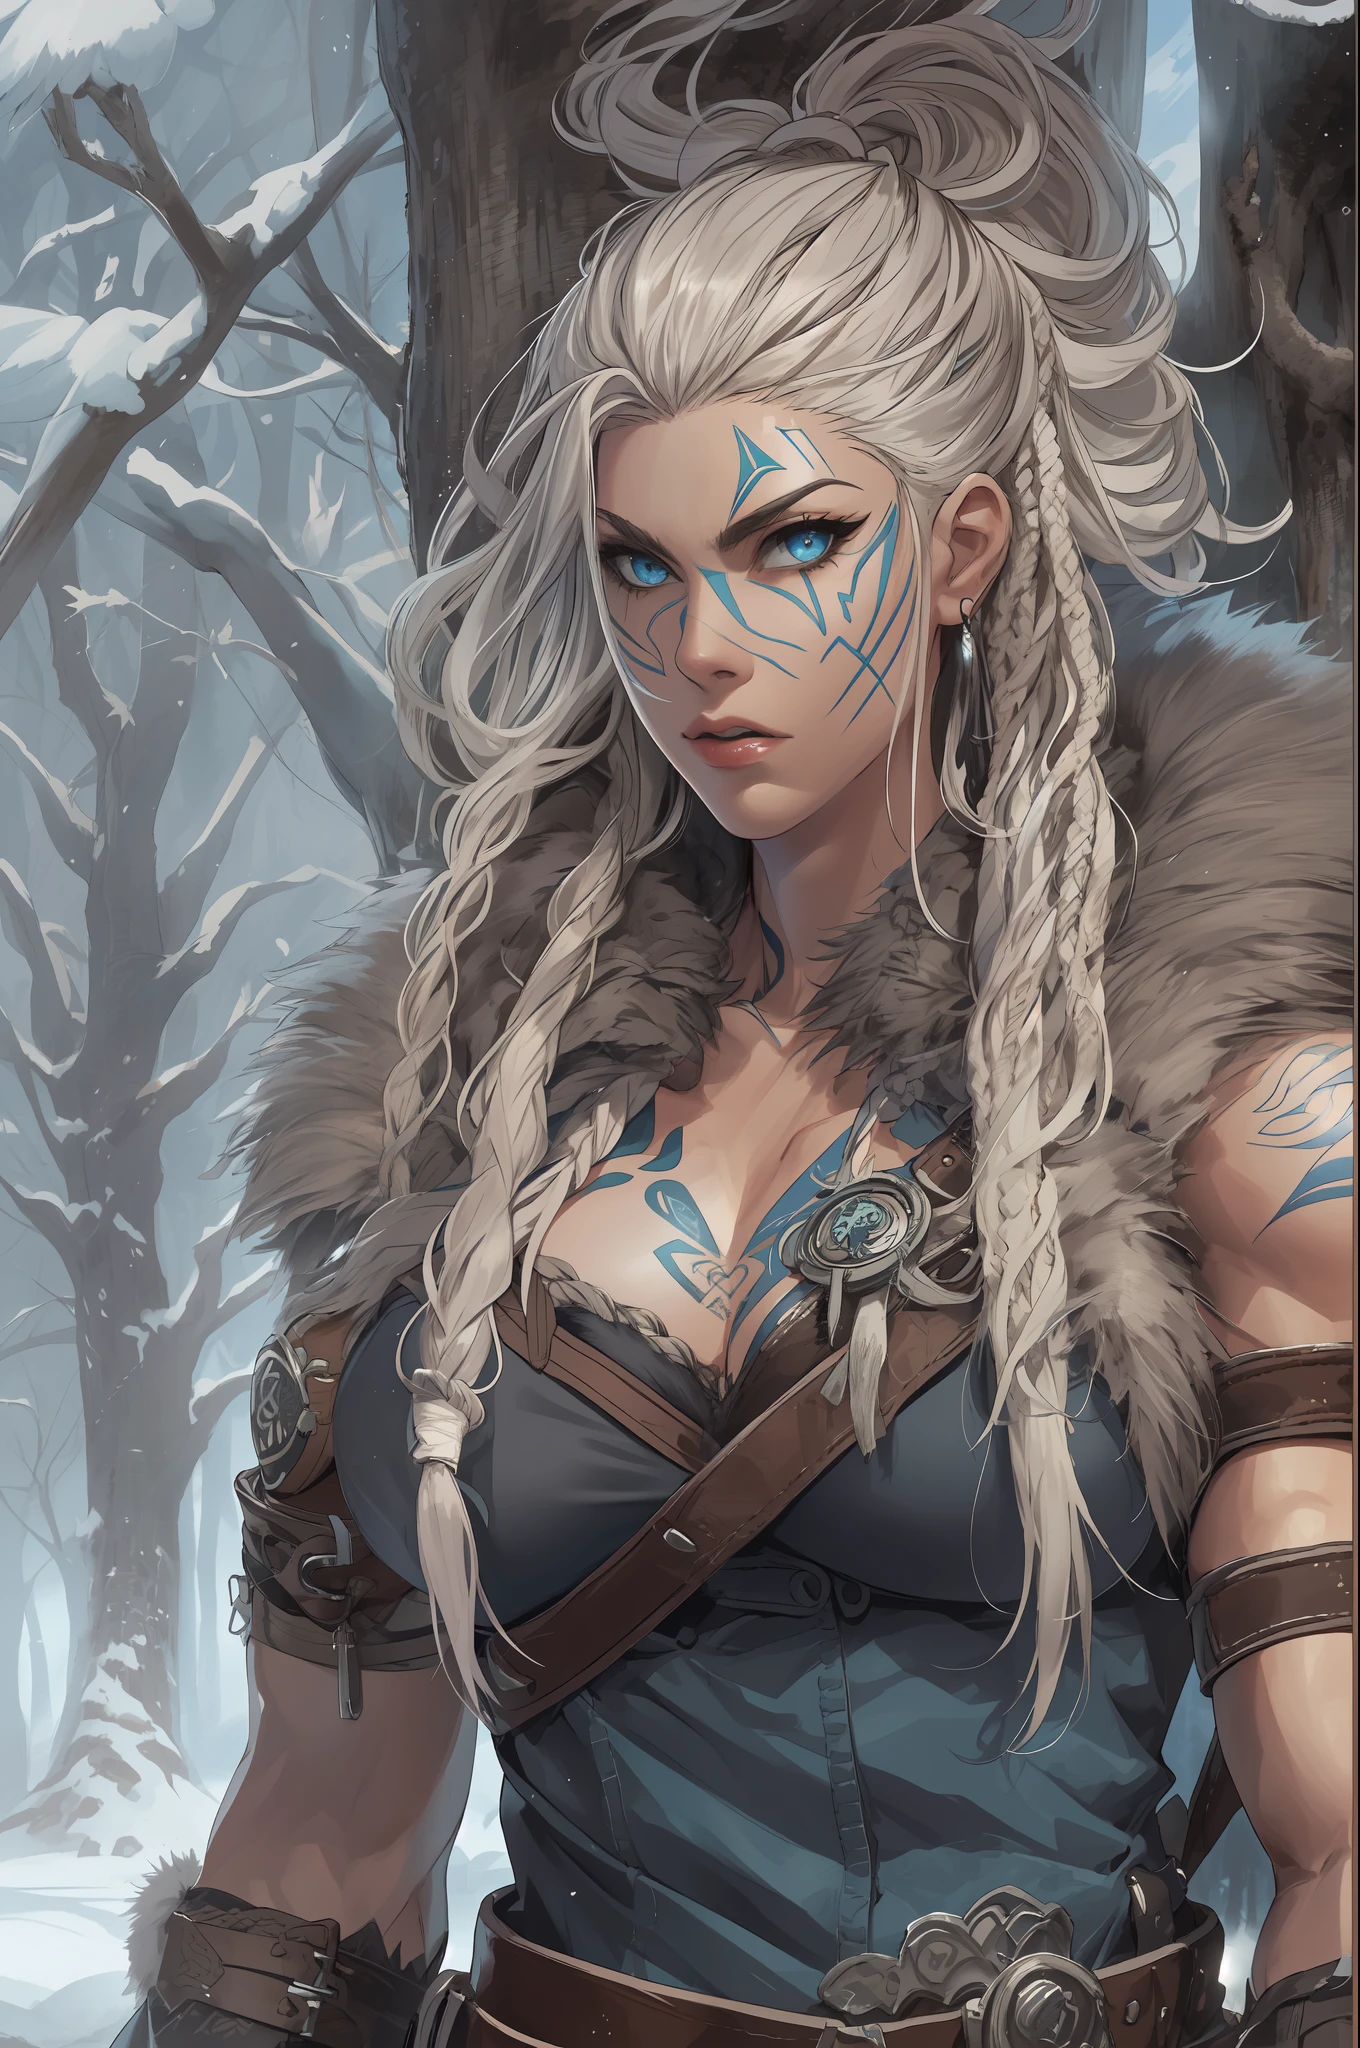 Female viking, (young:1.2), (muscular:1.2), fit, wearing brown furs and hides, (wearing furs:1.3) (blue norse tattoos:1.2), blue eyes, platinum blonde hair, (Dreadlocks:1.4), (Dreads:1.4), (Sideshave:1.4), warrior hair, Setting is a Scandinavian forest in winter, snow, bare arms, exposed naval, (abs:1.2). Highly detailed, norse, berserker, arm muscles, leg muscles, (bulky:1.2), leather straps, (large breasts:1.3), waist up, wide waist, stocky, (tall:1.4), Create an image using a prism effect, with light refracting and creating a colorful, kaleidoscopic appearance. BREAK , Design an image with a fisheye lens effect, capturing a wide field of view with a distinctive, curved perspective. BREAK , Capture a forest path, with towering trees, dappled sunlight, and a sense of tranquility and natural beauty. BREAK , Illustrate a monochromatic world, using only shades of black, white, and gray to convey depth, emotion, and a striking visual impact.